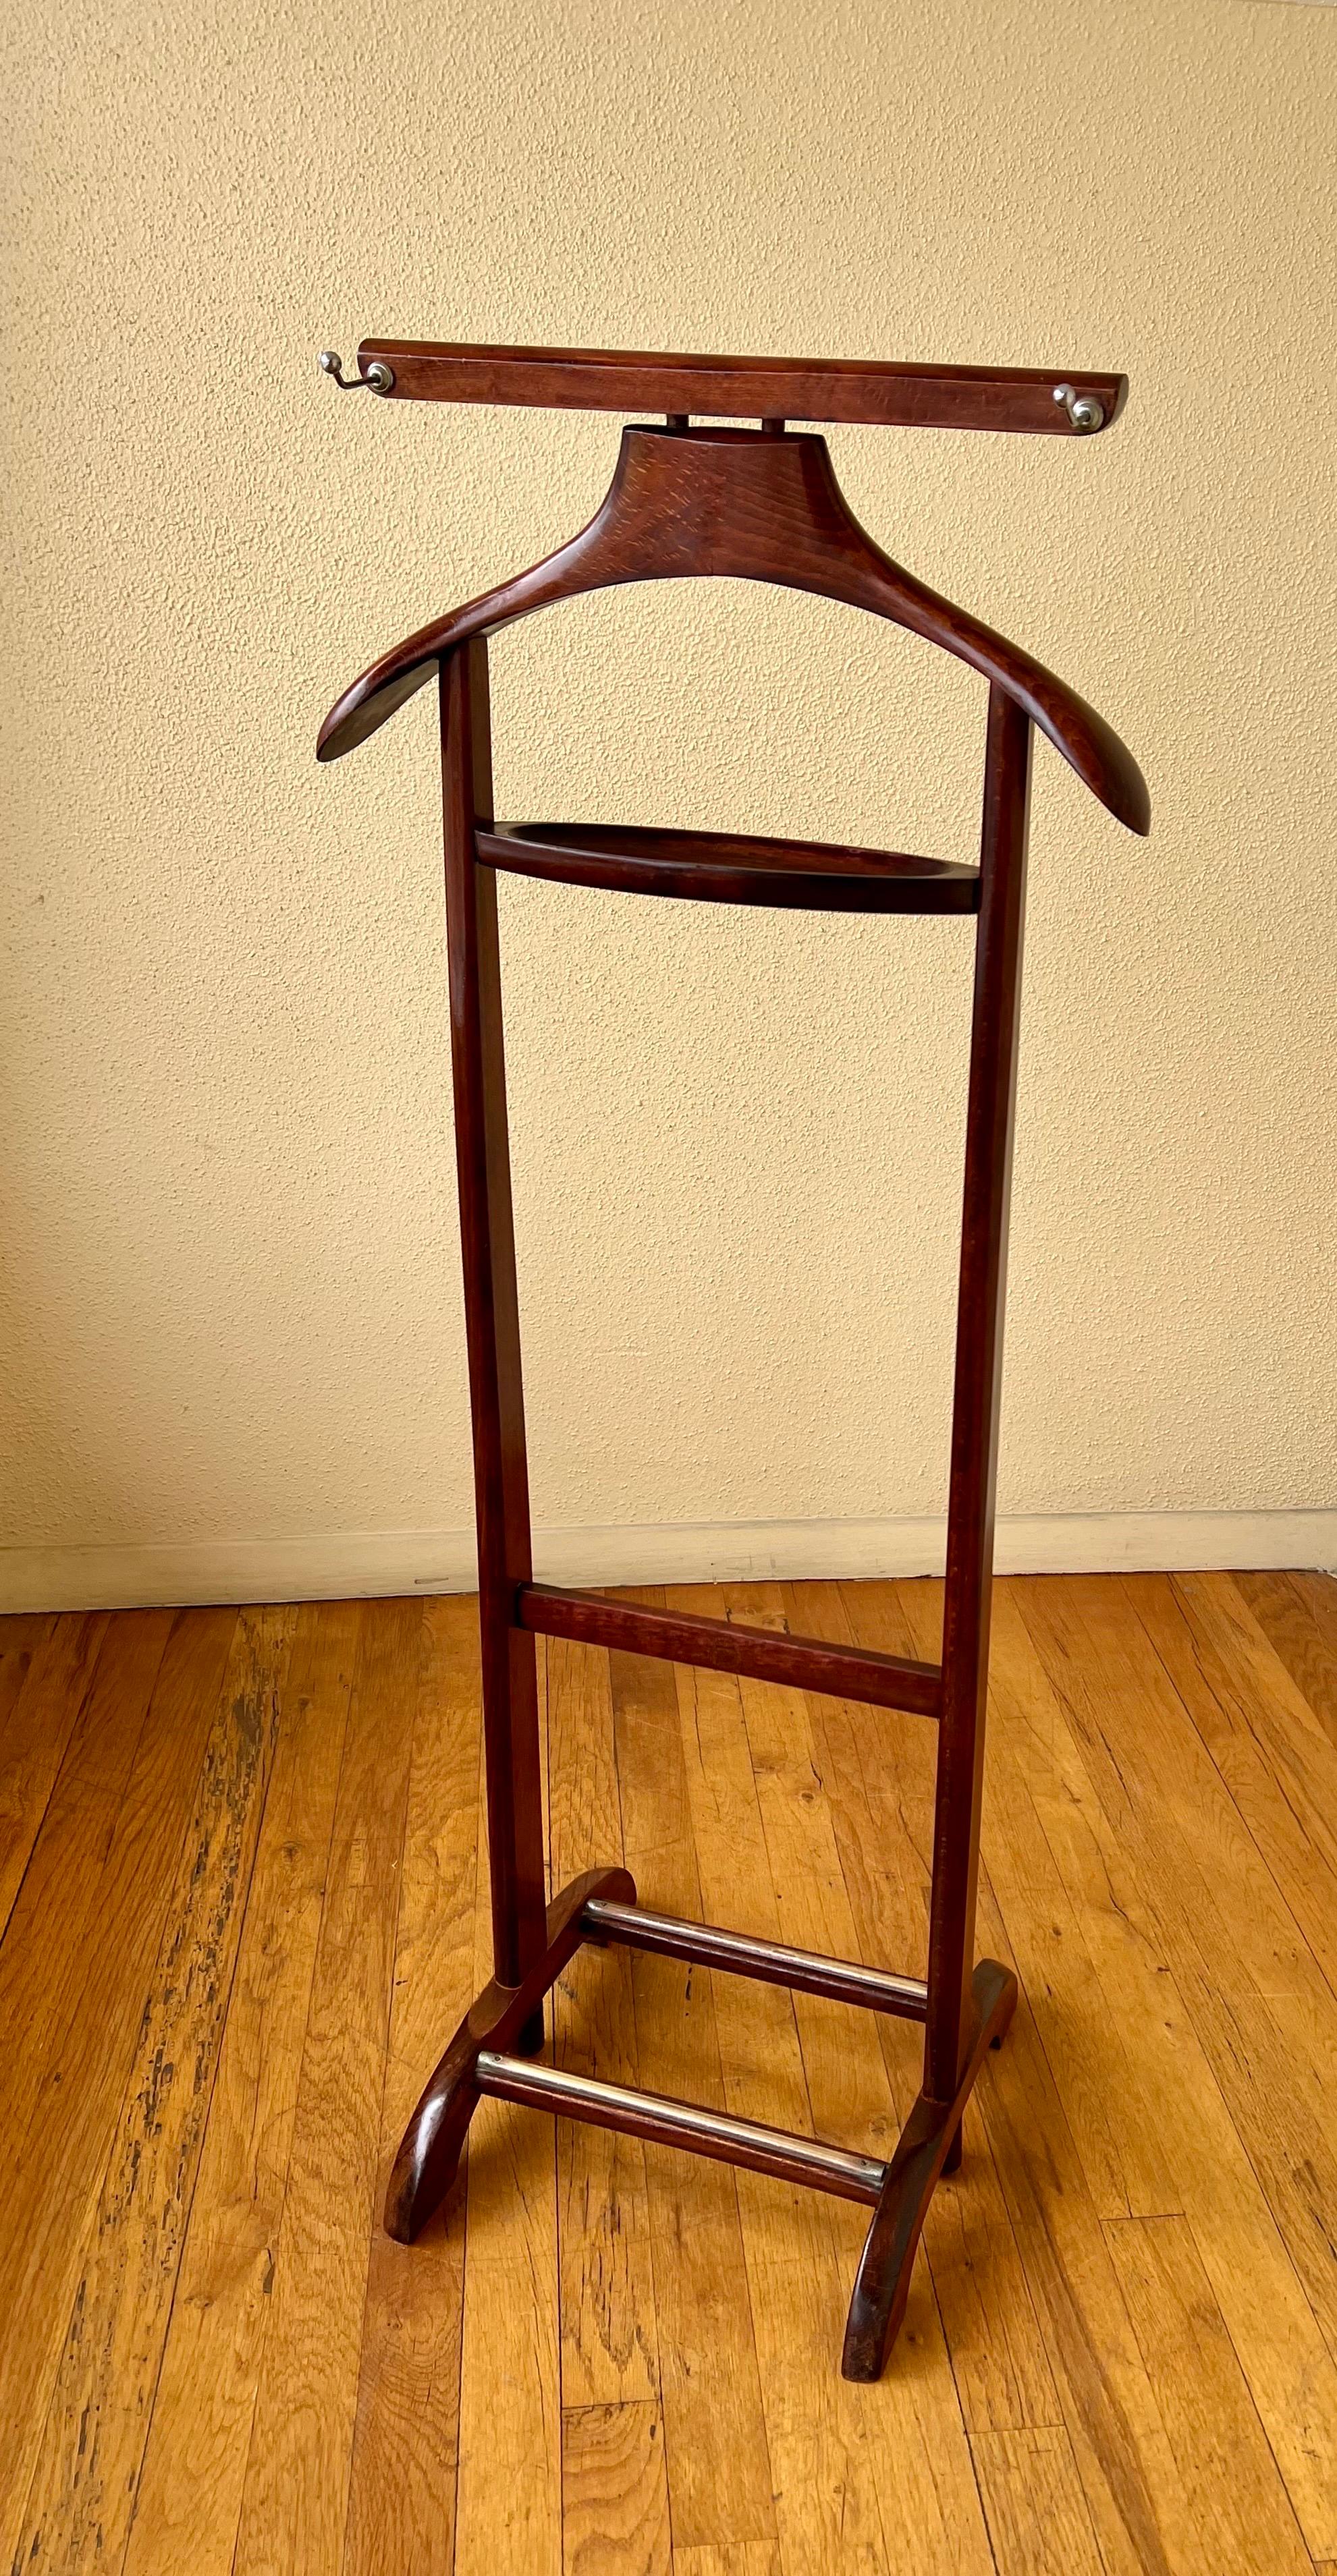 Elegant solid mahogany Mid-Century Modern gentlemen valet by Ico & Luisa Parisi for Fratelli Reguitti was made of solid mahogany with brass details for shoes rest
The valet is labeled with FR (Fratelli Reguitti) Intern. Patent Made in Italy.